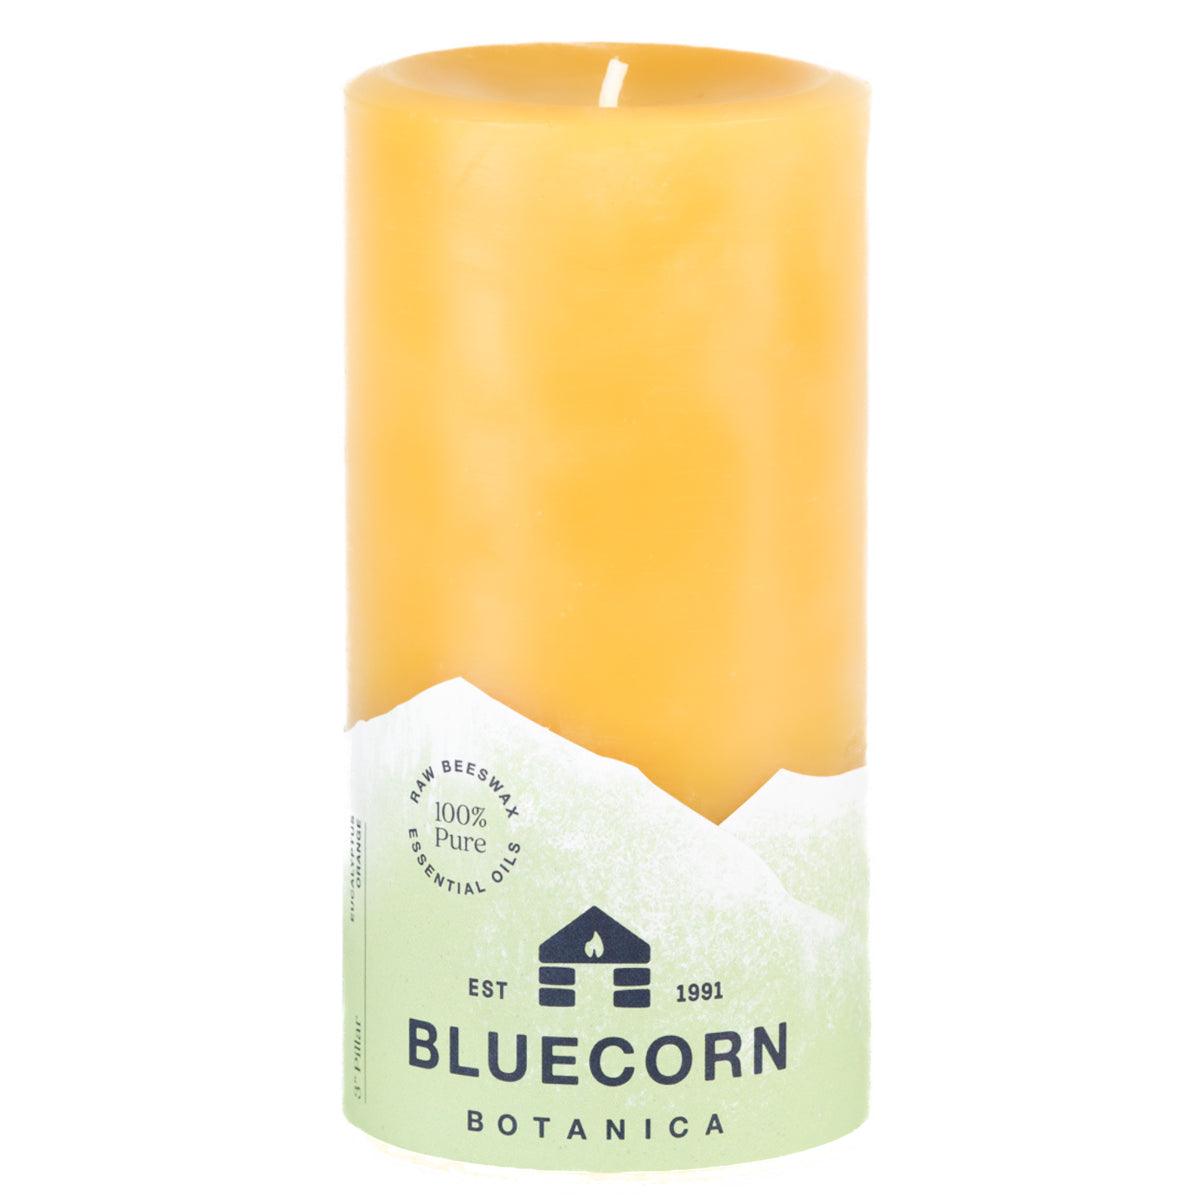 Bluecorn Botanica 100% Pure Beeswax Eucalyptus & Orange 3" x 6" Scented Pillar Candle. Burn Time: 90 hours. Made with 100% Pure Beeswax, 100% Pure Essential Oils, and a 100% pure cotton wick, no lead. Candles are paraffin free, clean burning and non-toxic. Features Bluecorn Botanica label in Green printed on 100% recycled paper. Wax is golden in color.